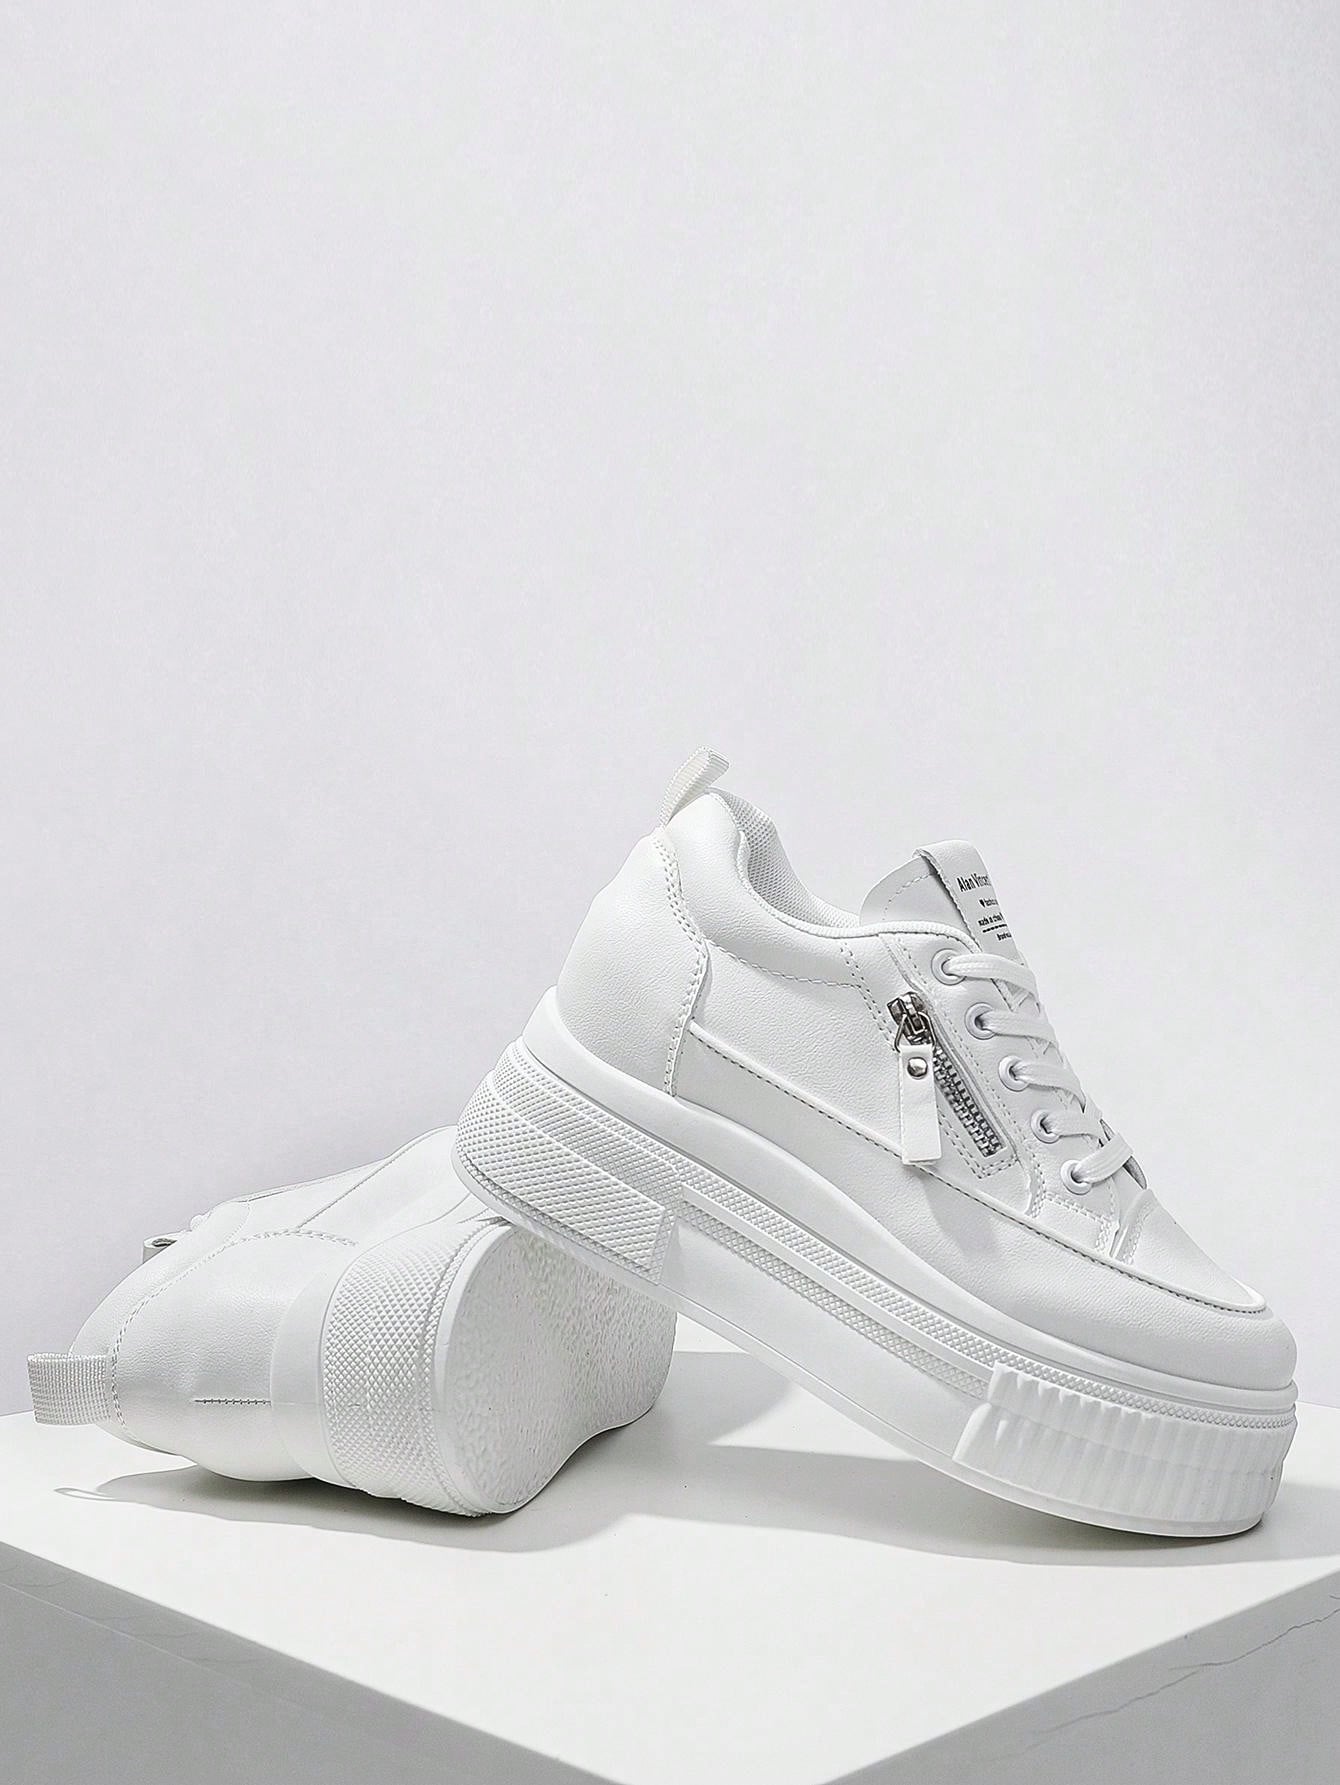 New Style Casual Shoes For Women, Ladies Platform Shoes With  Zipper, White Shoes, Outdoor Comfortable Sneakers, Internal Increase 5cm, Party Shoes, Suitable For Short Women-White-11